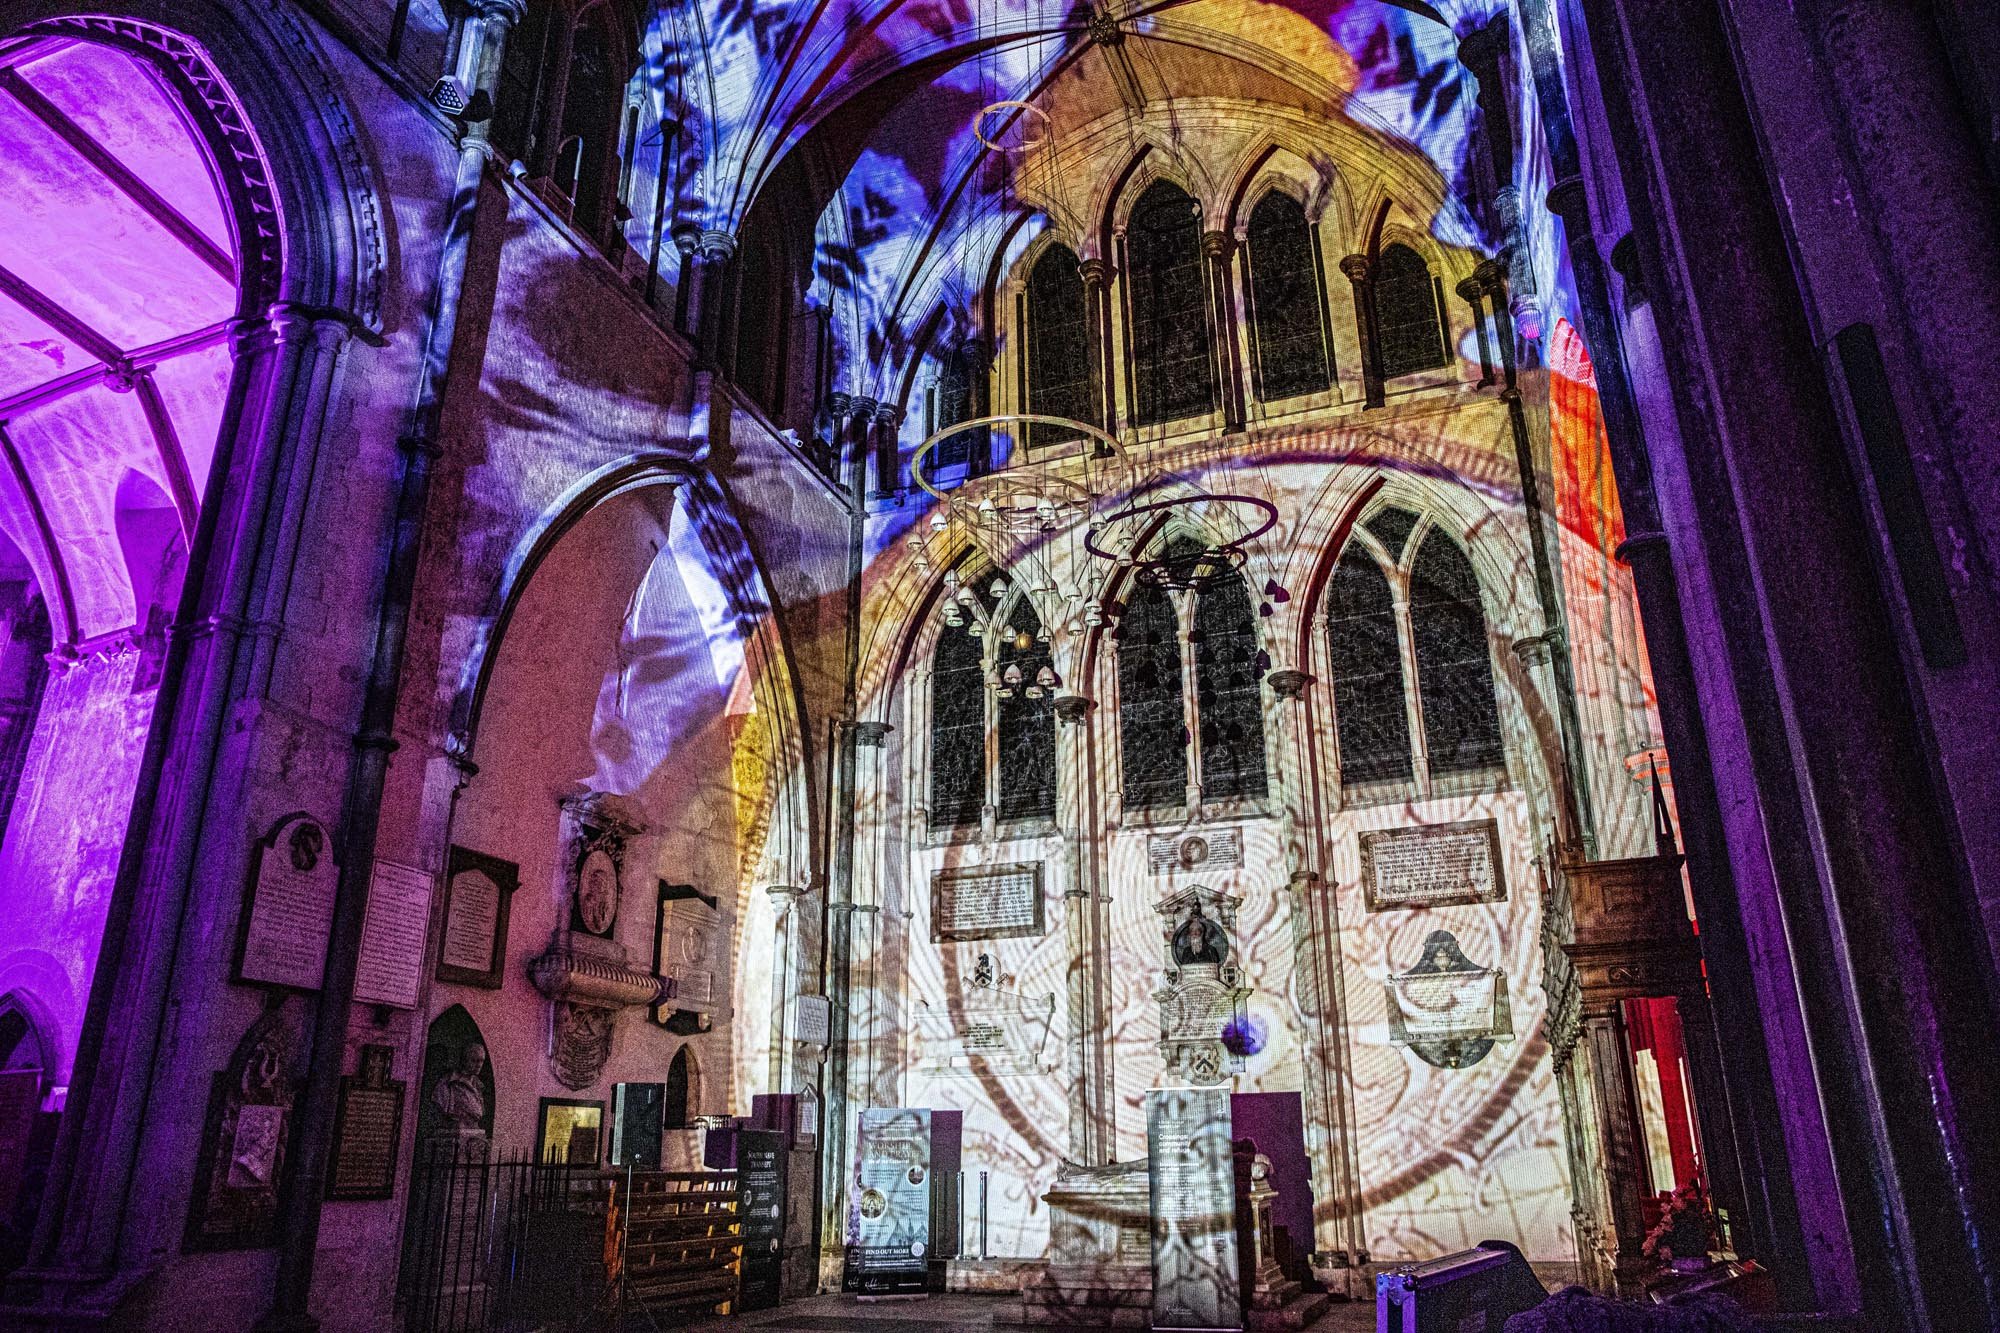 Photograph of the south nave transept during the Life lightshow.